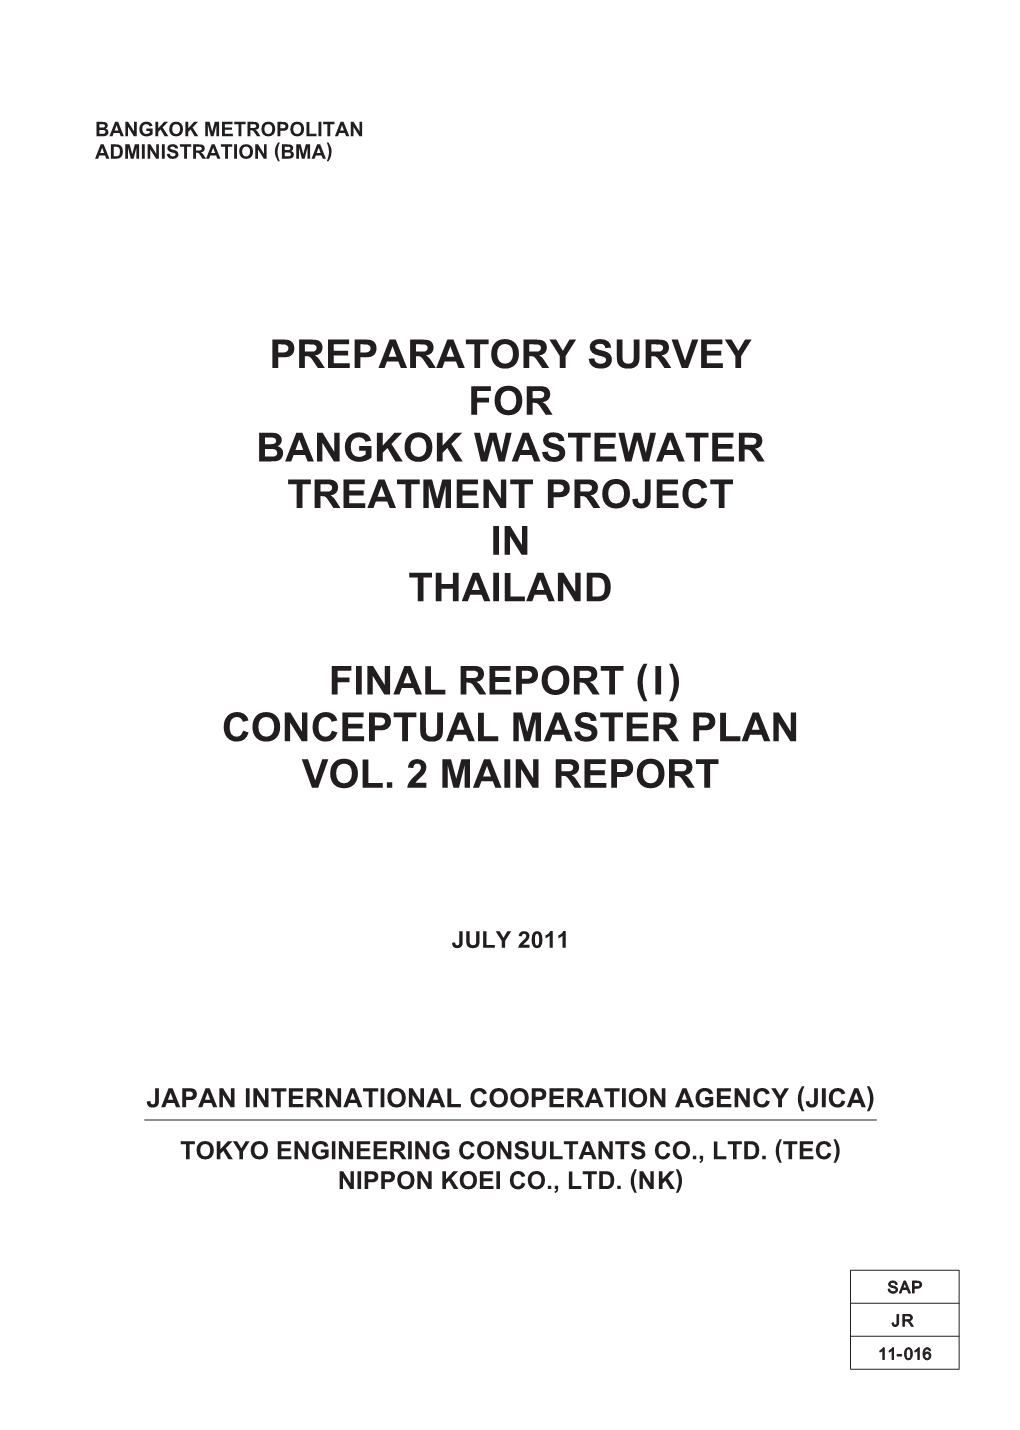 Preparatory Survey for Bangkok Wastewater Treatment Project in Thailand